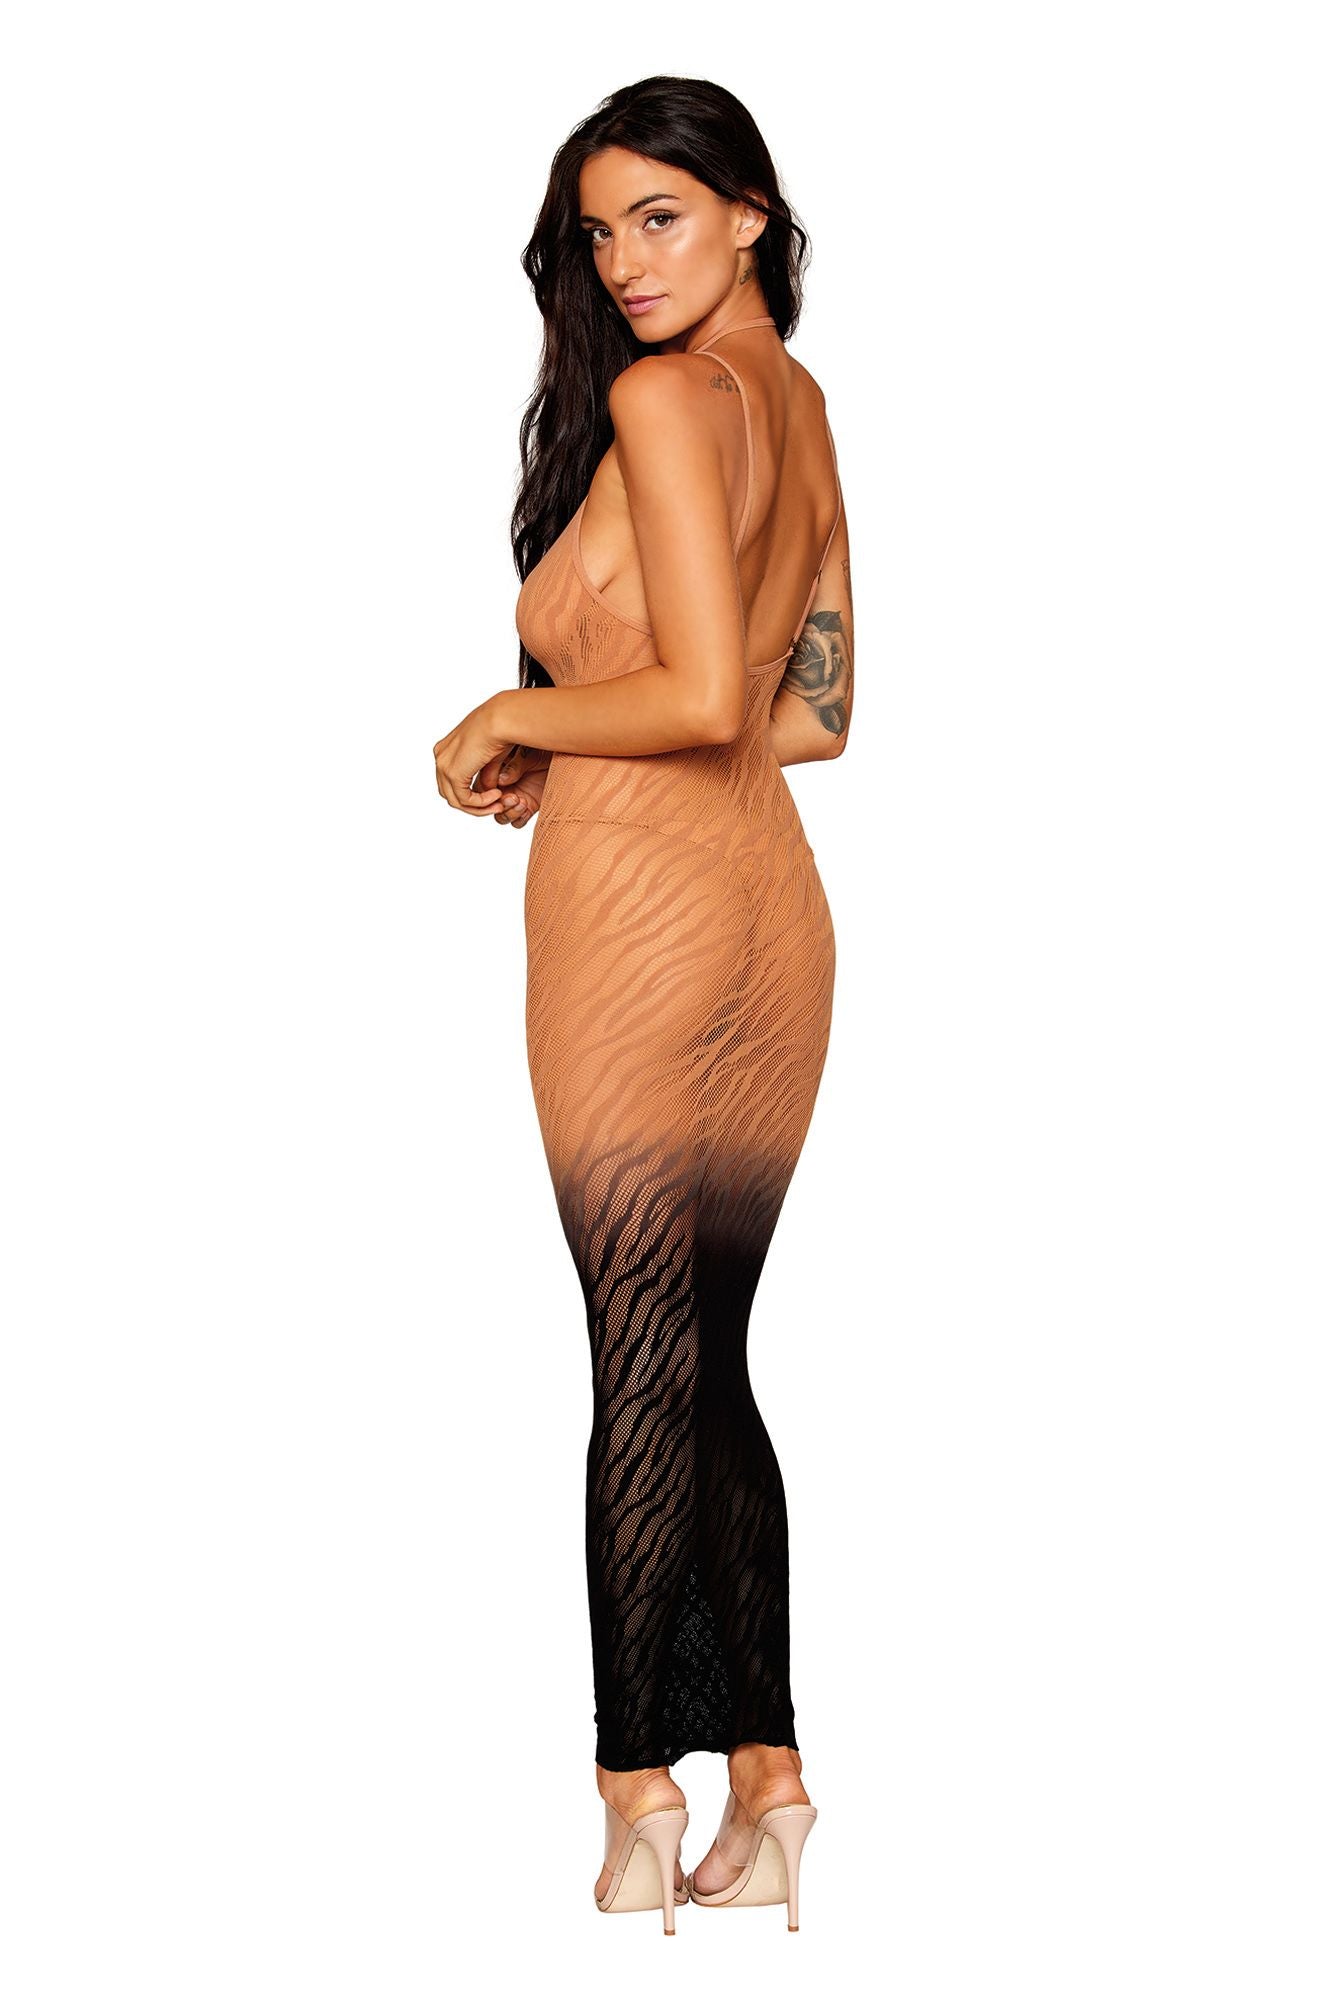 DG0488 Sexy Seamless Zebra Knit Design Bodystocking Gown with Two-Tone Ombre Color